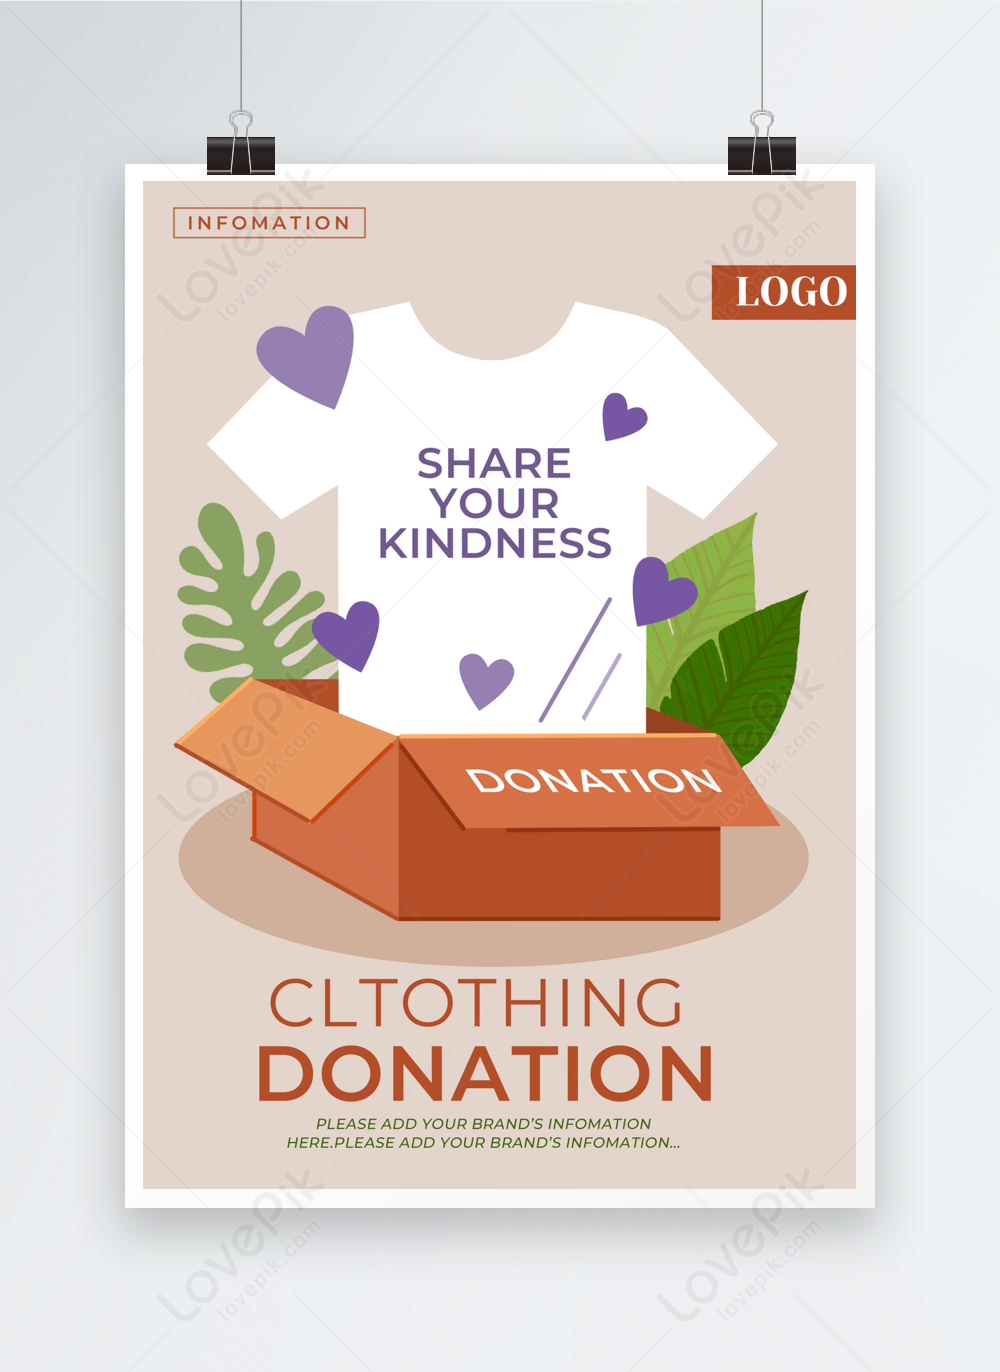 Clothes donation box charity donation poster template image_picture ...